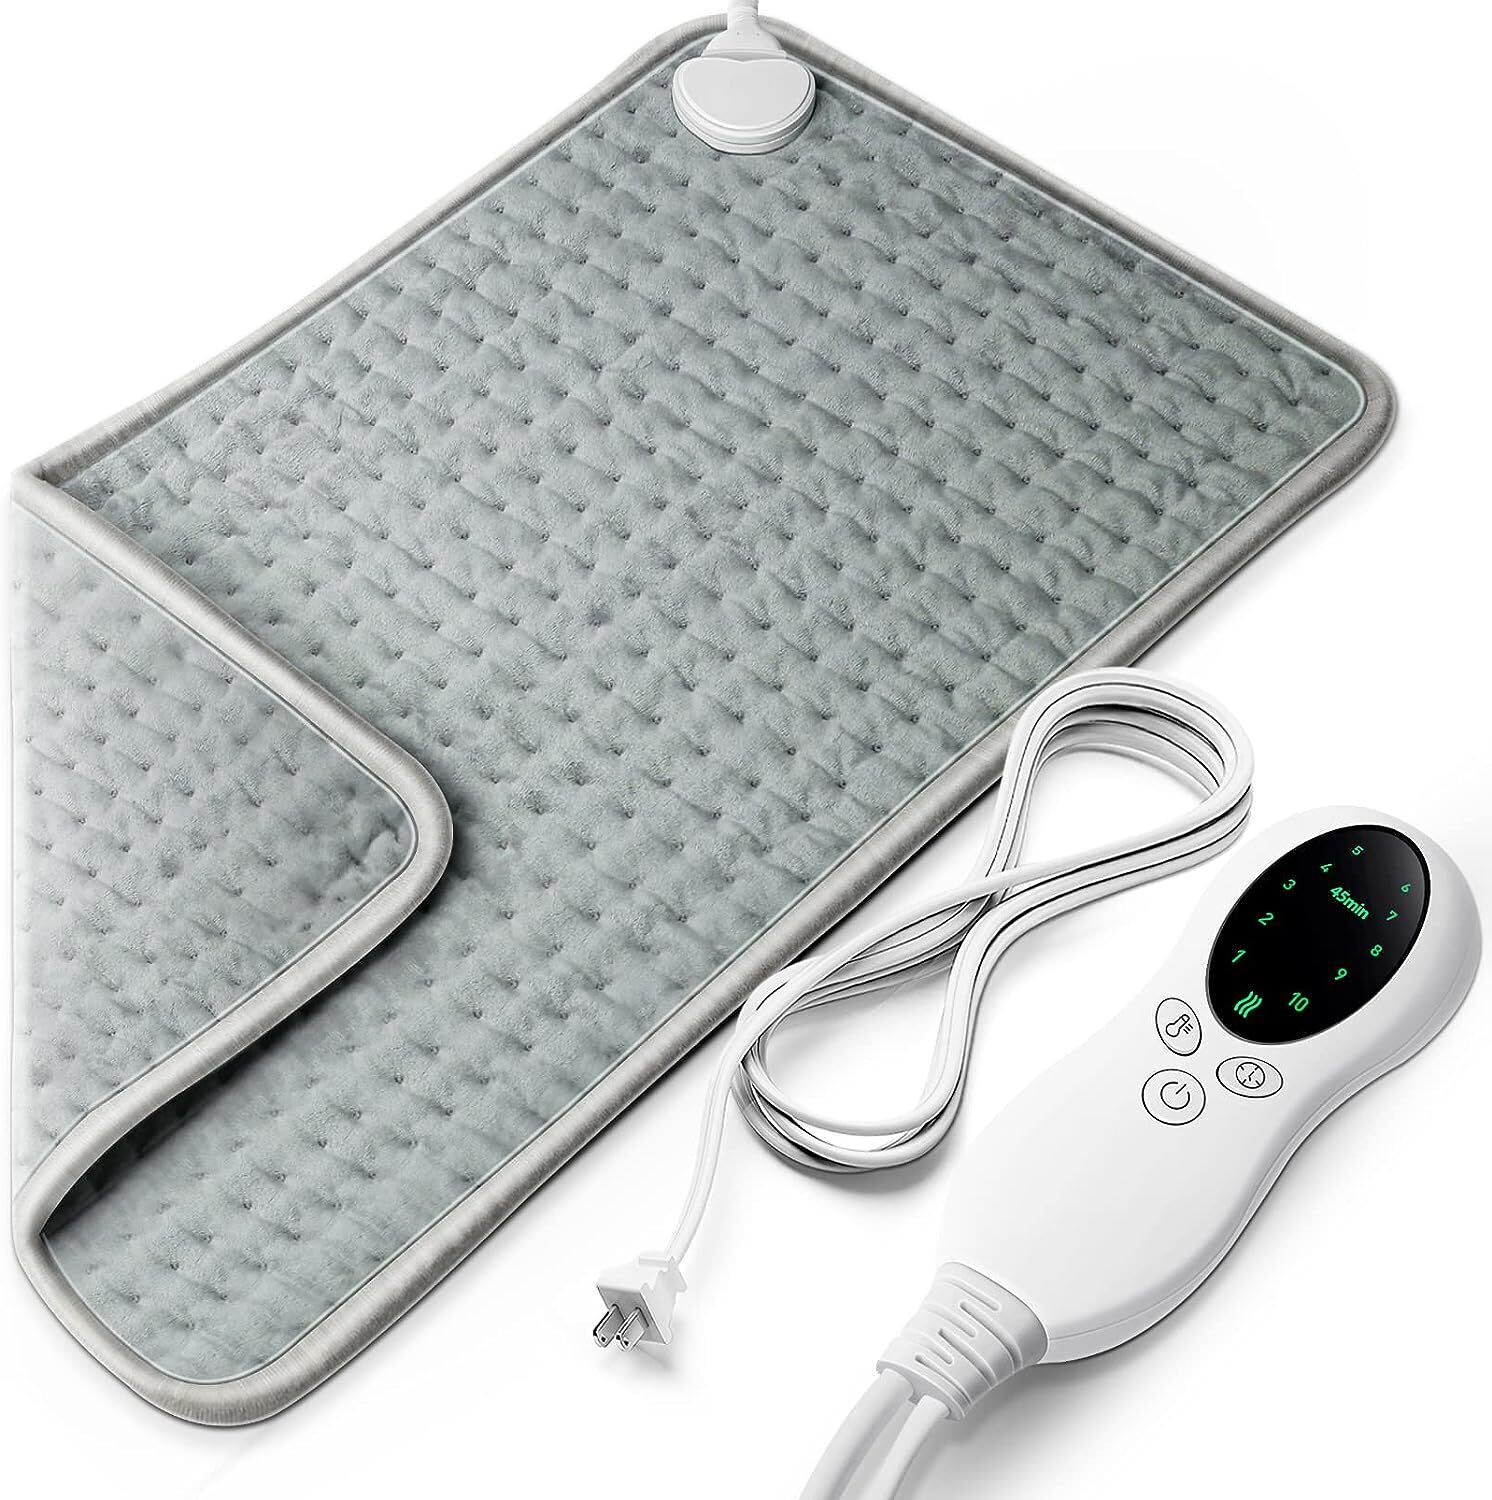 Heating Pad 10 Different Settings Auto Off Function Moist Heat /Dry Heat Therapy